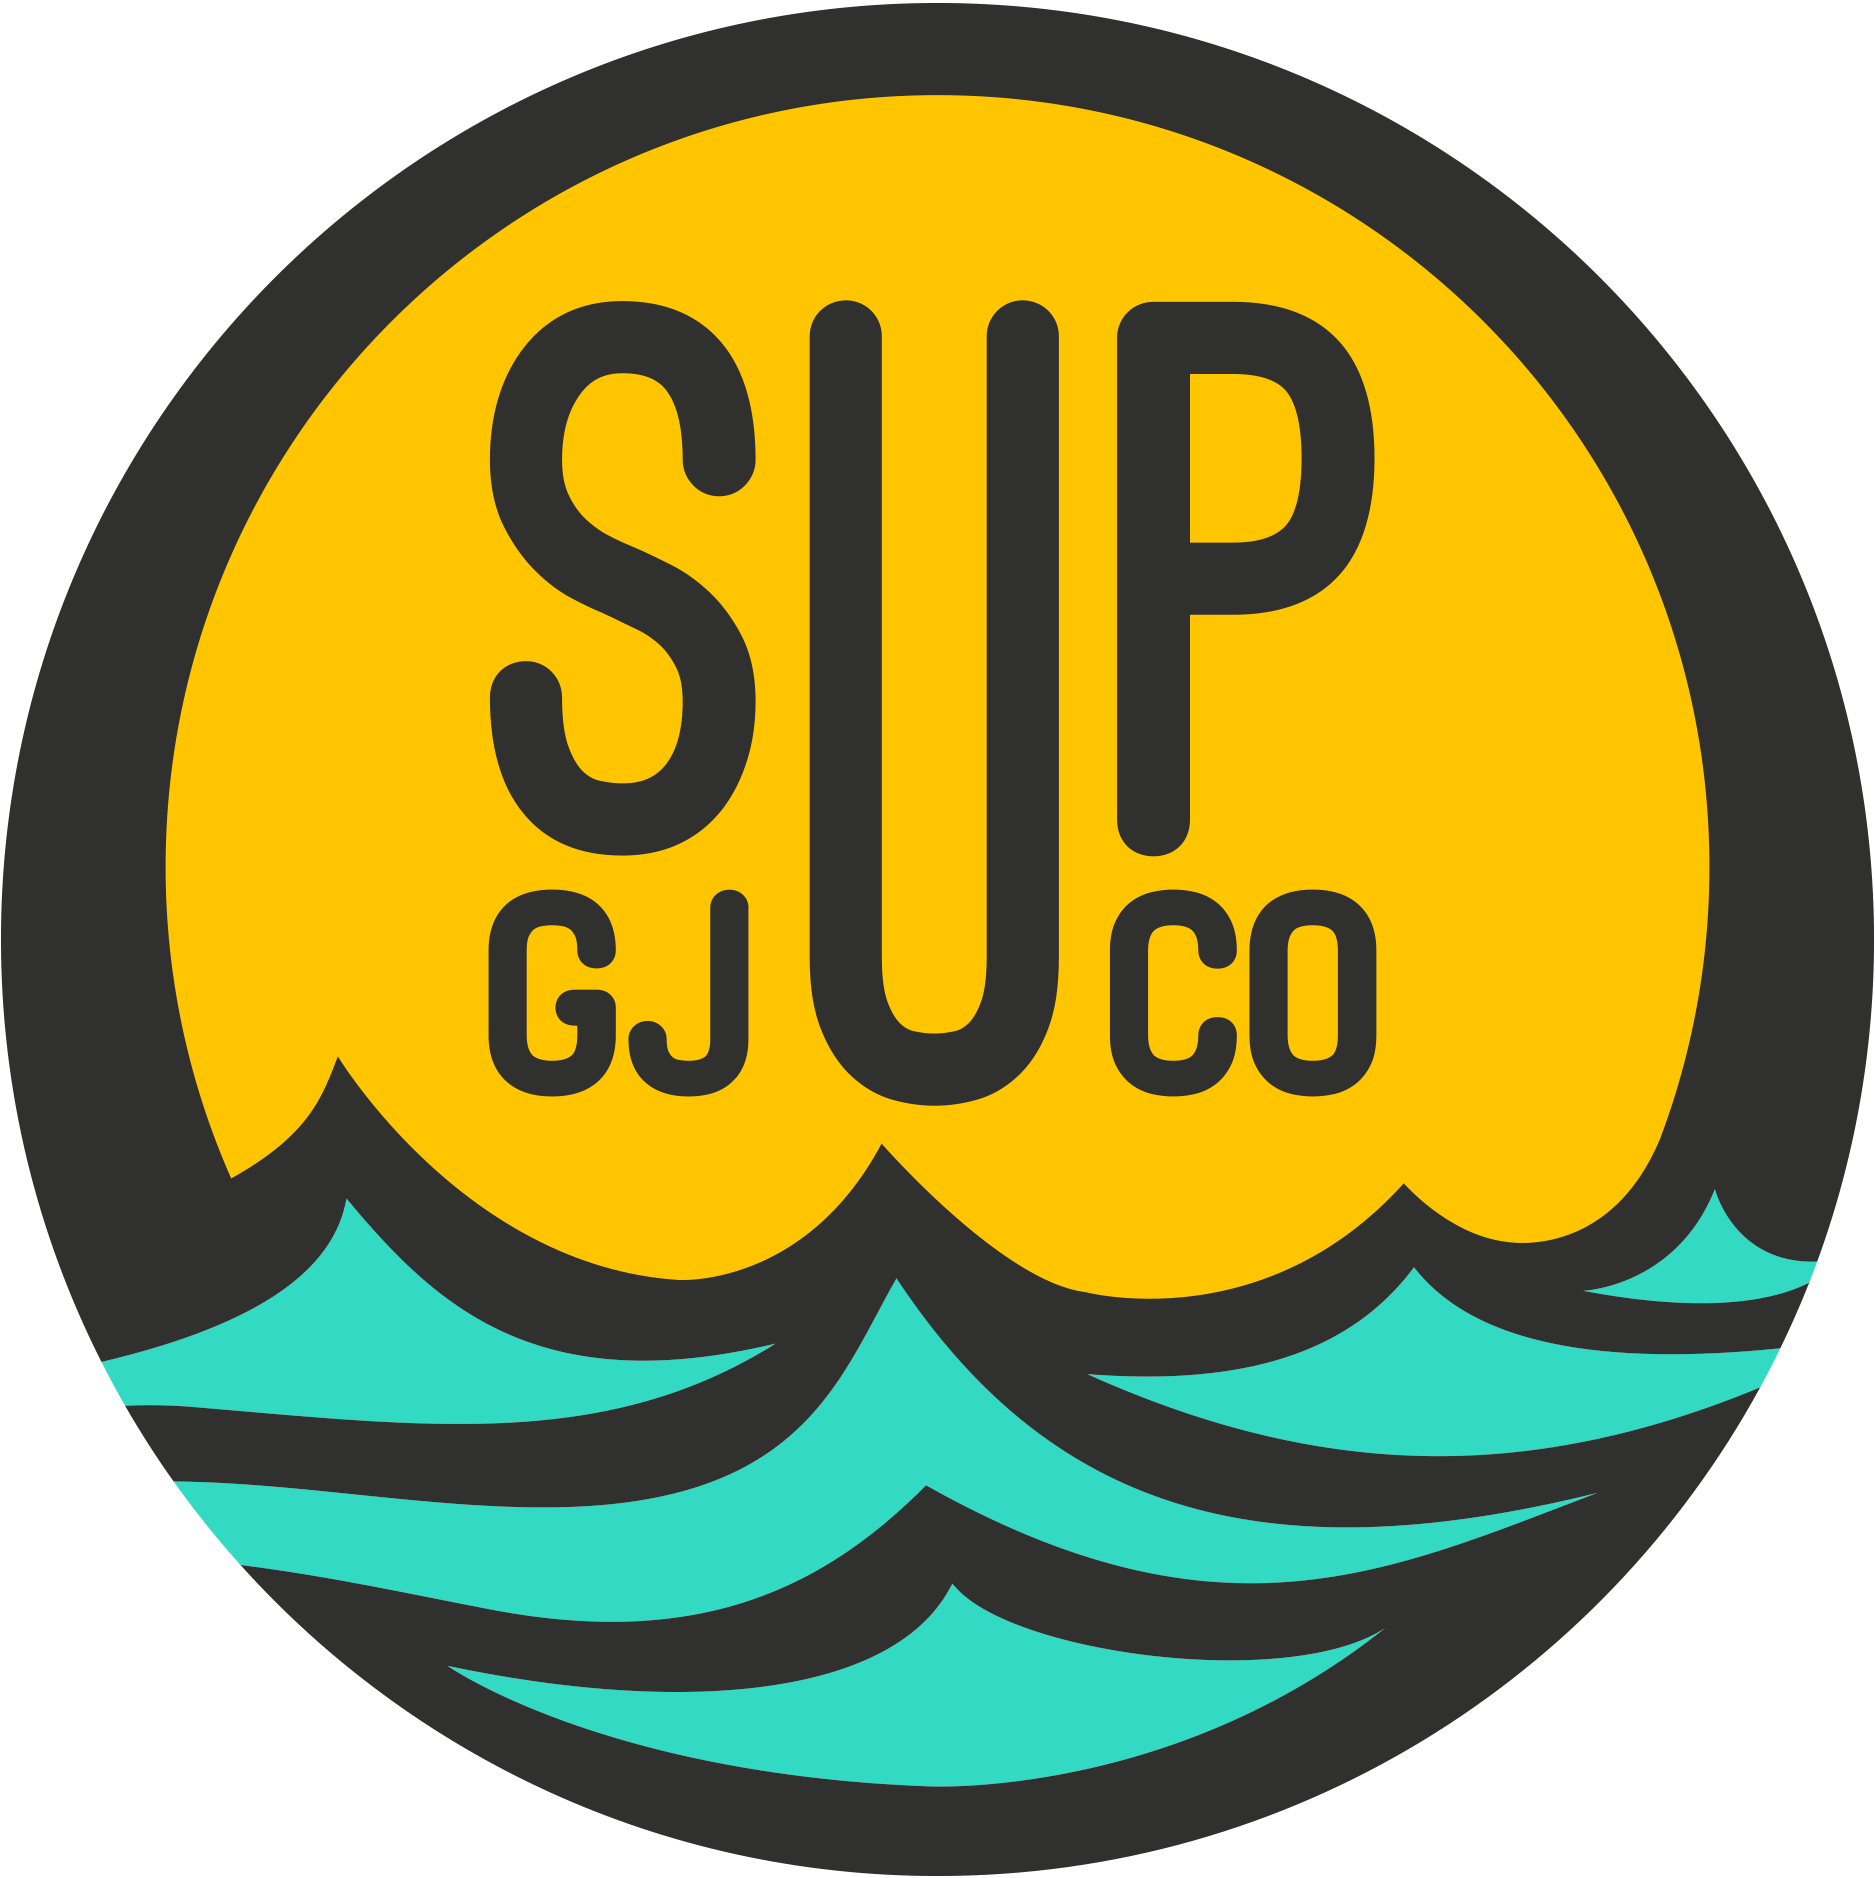 Paddleboard Logo - GJ SUP – Grand Junction Stand Up Paddle Board